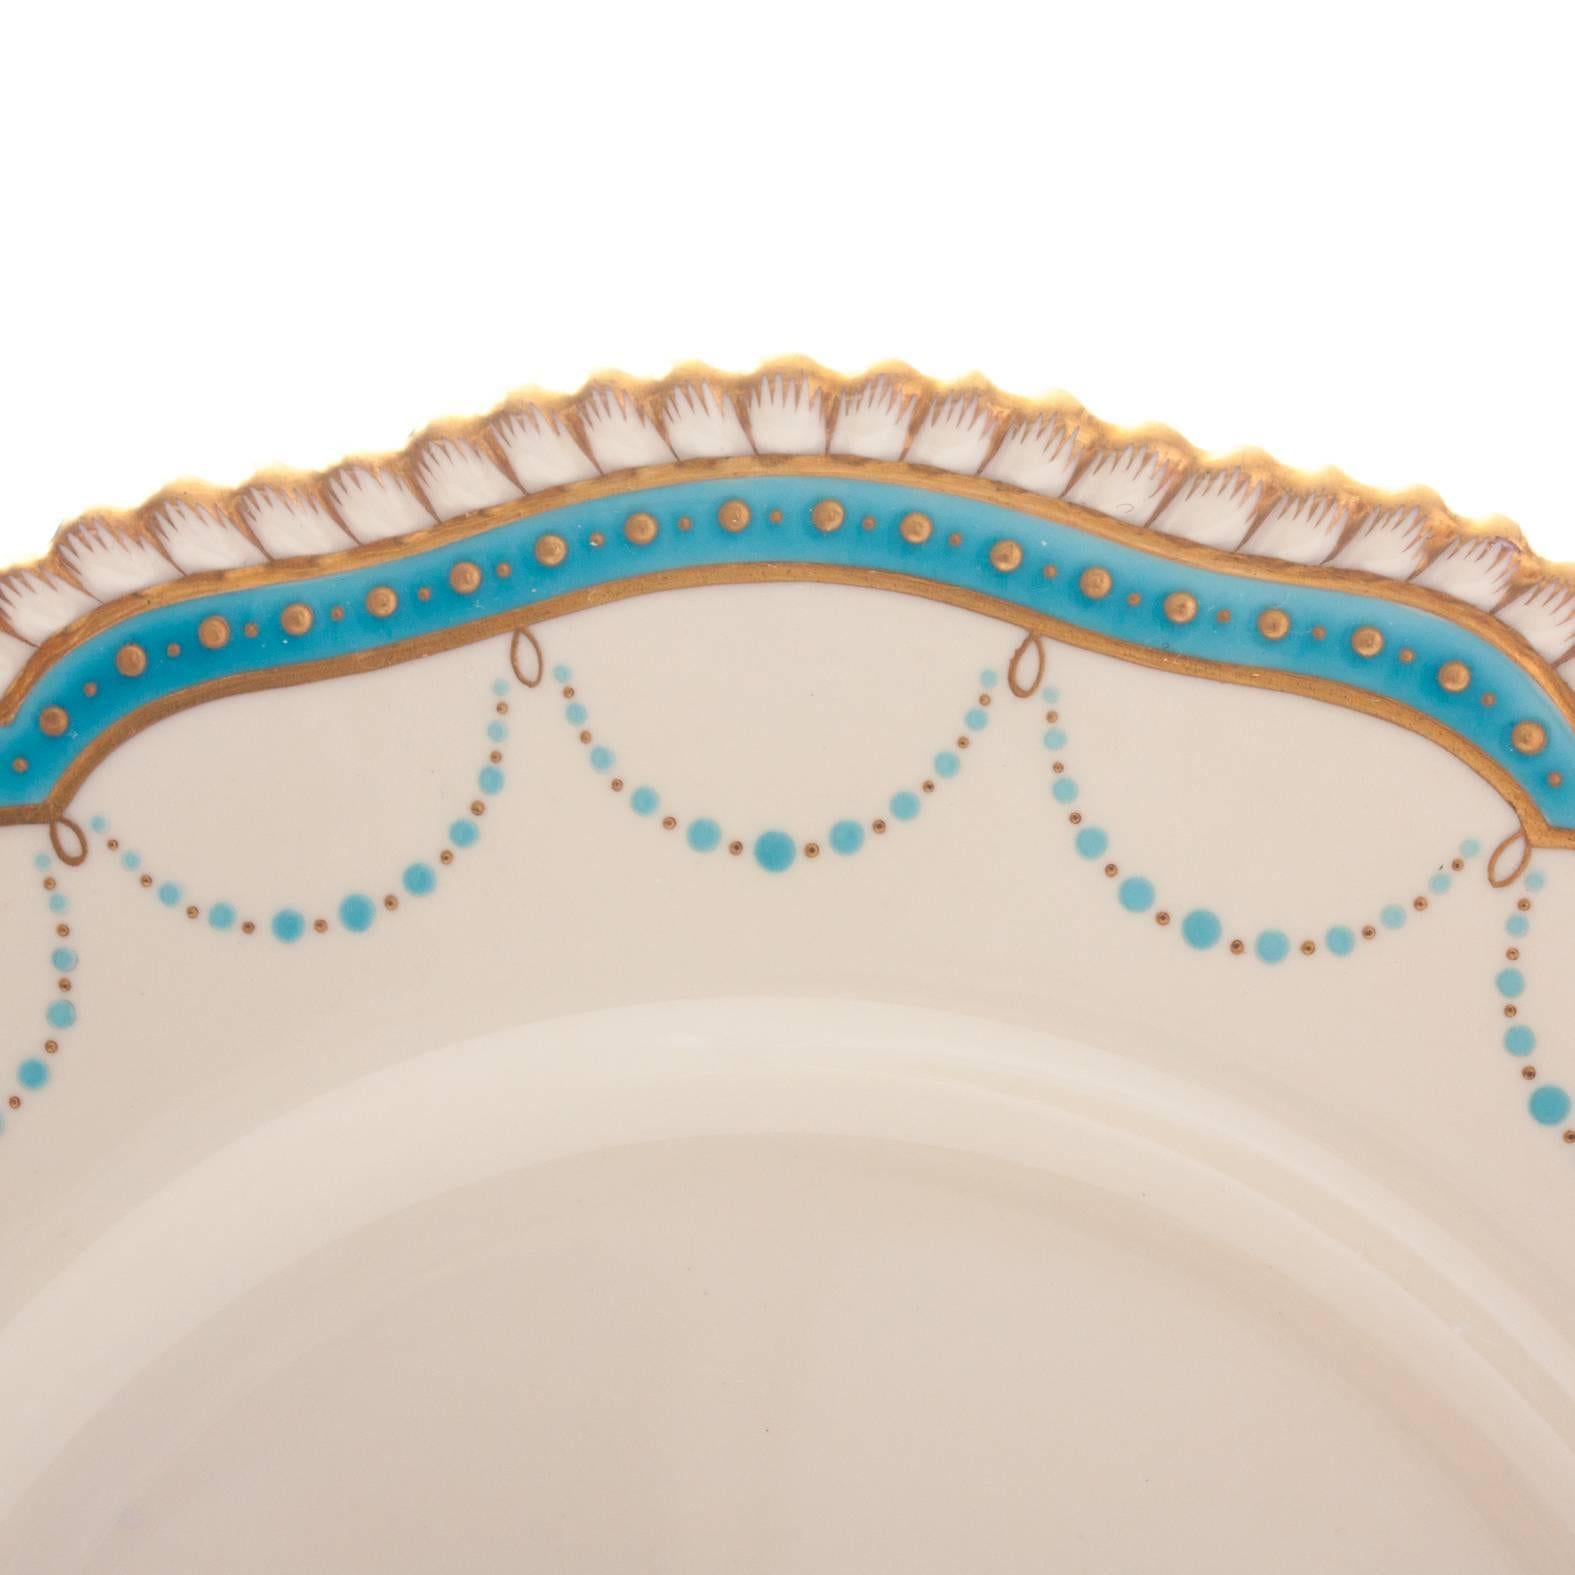 A set of Spode, England Dinner Plates featuring a lovely gadroon edge and highlighted with hand crafted turquoise 